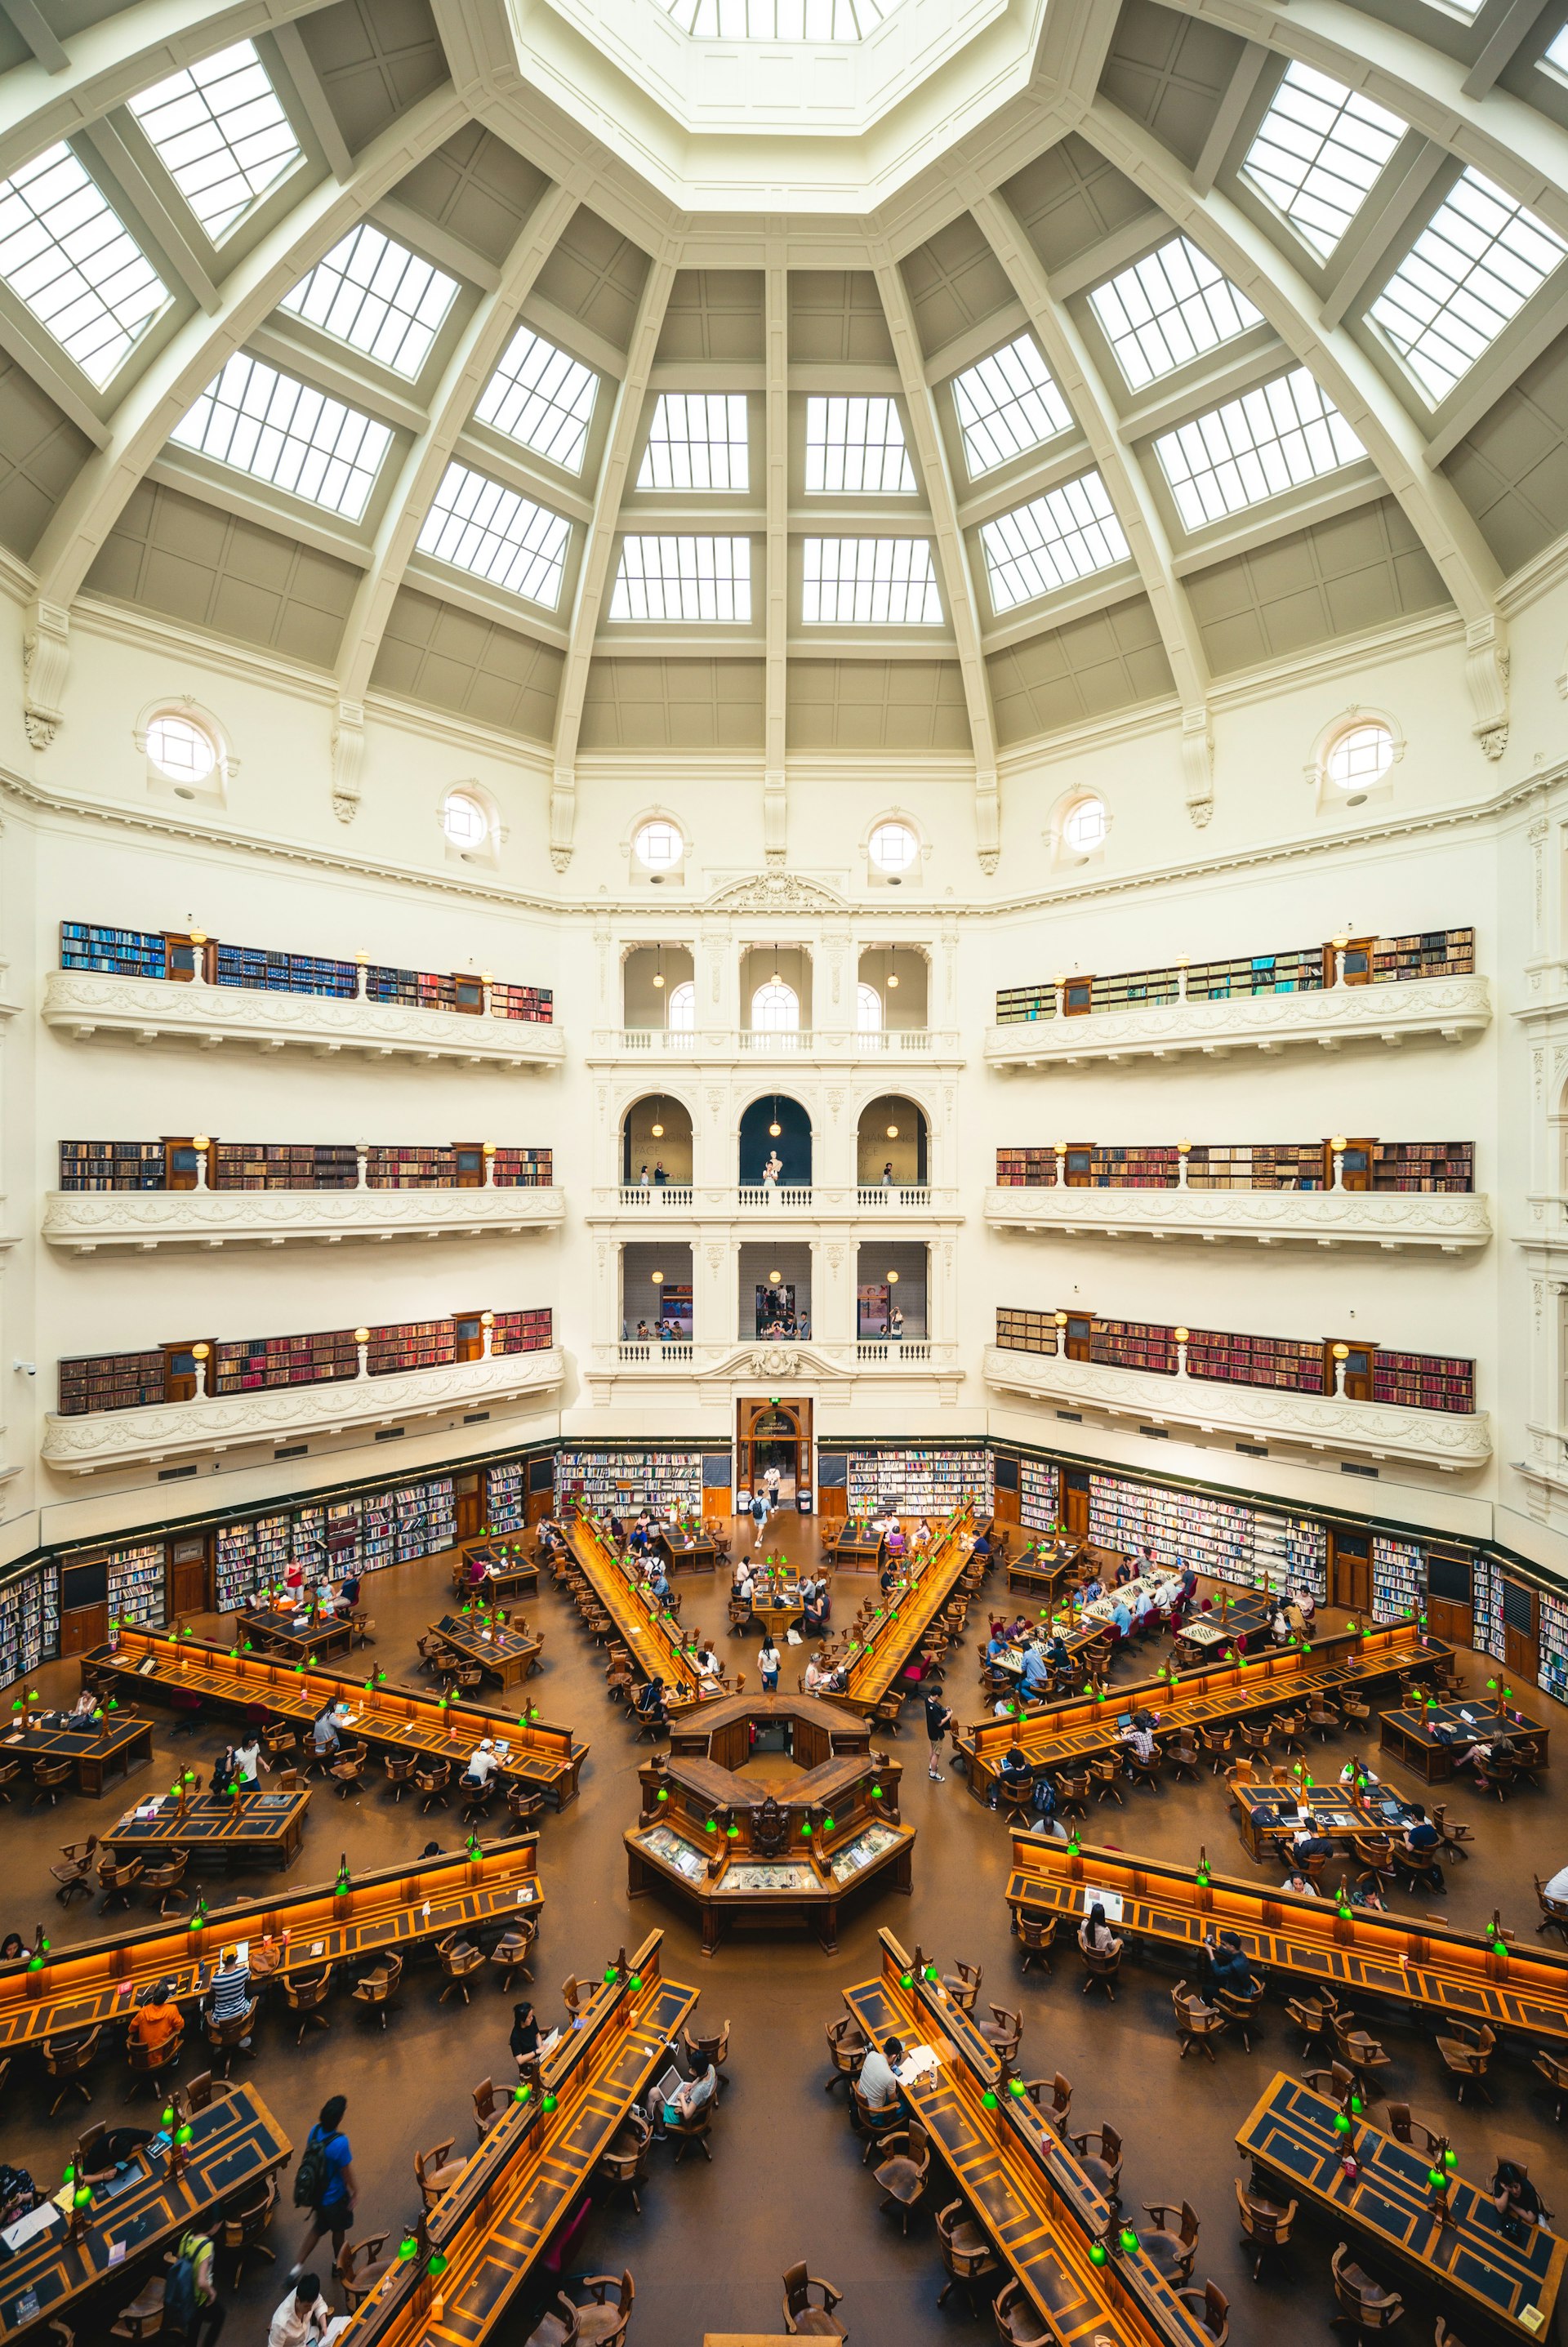 A vertical profile view of the La Trobe Reading Room at the State Library of Victoria, Melbourne. The room has a high, dome ceiling and a number of old-looking desks, where people sit to study and read.